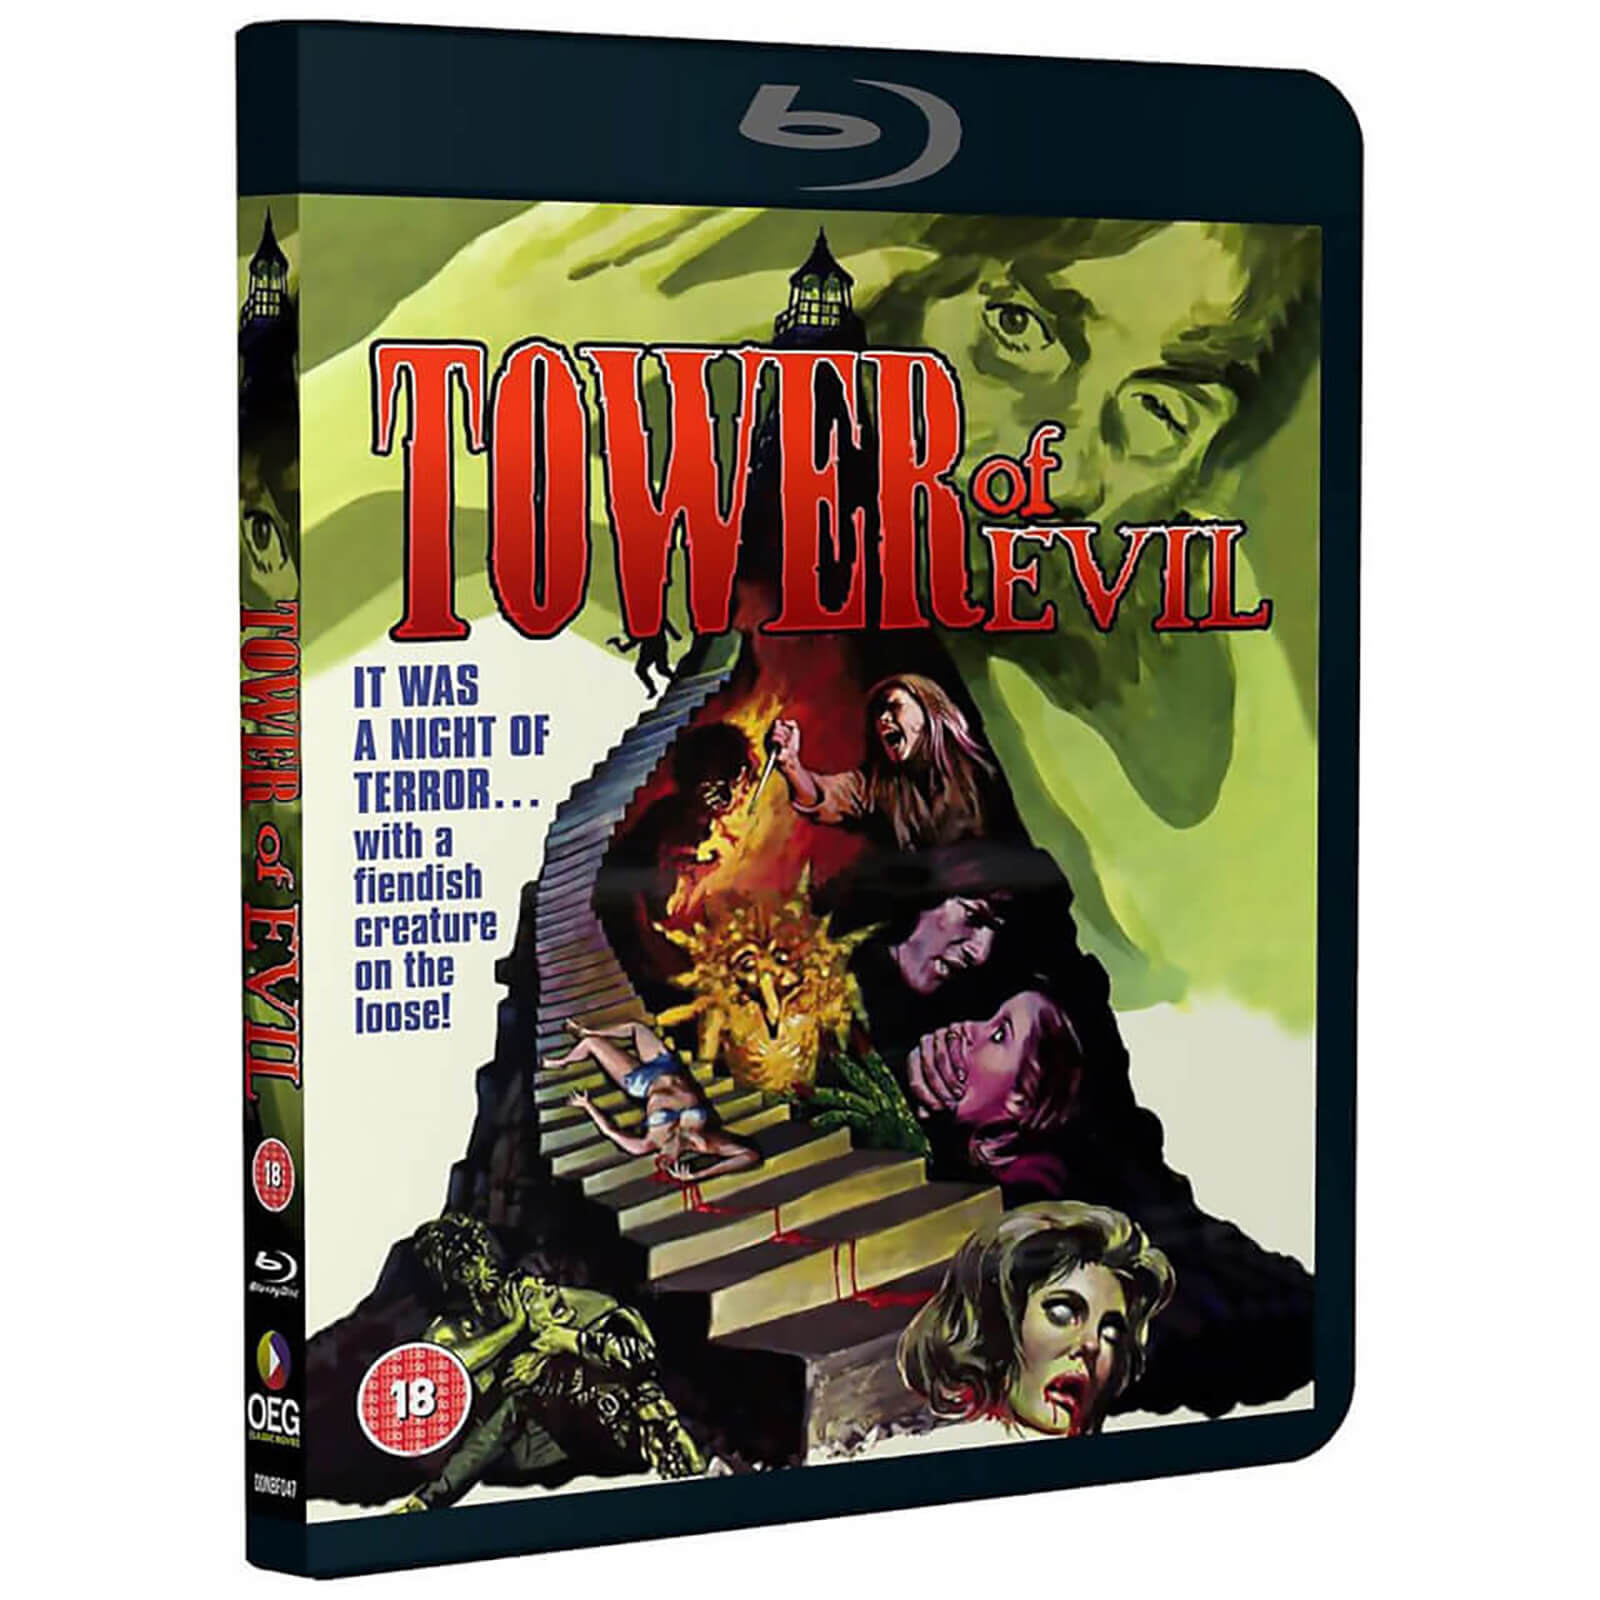 Tower of Evil (Blu-ray)